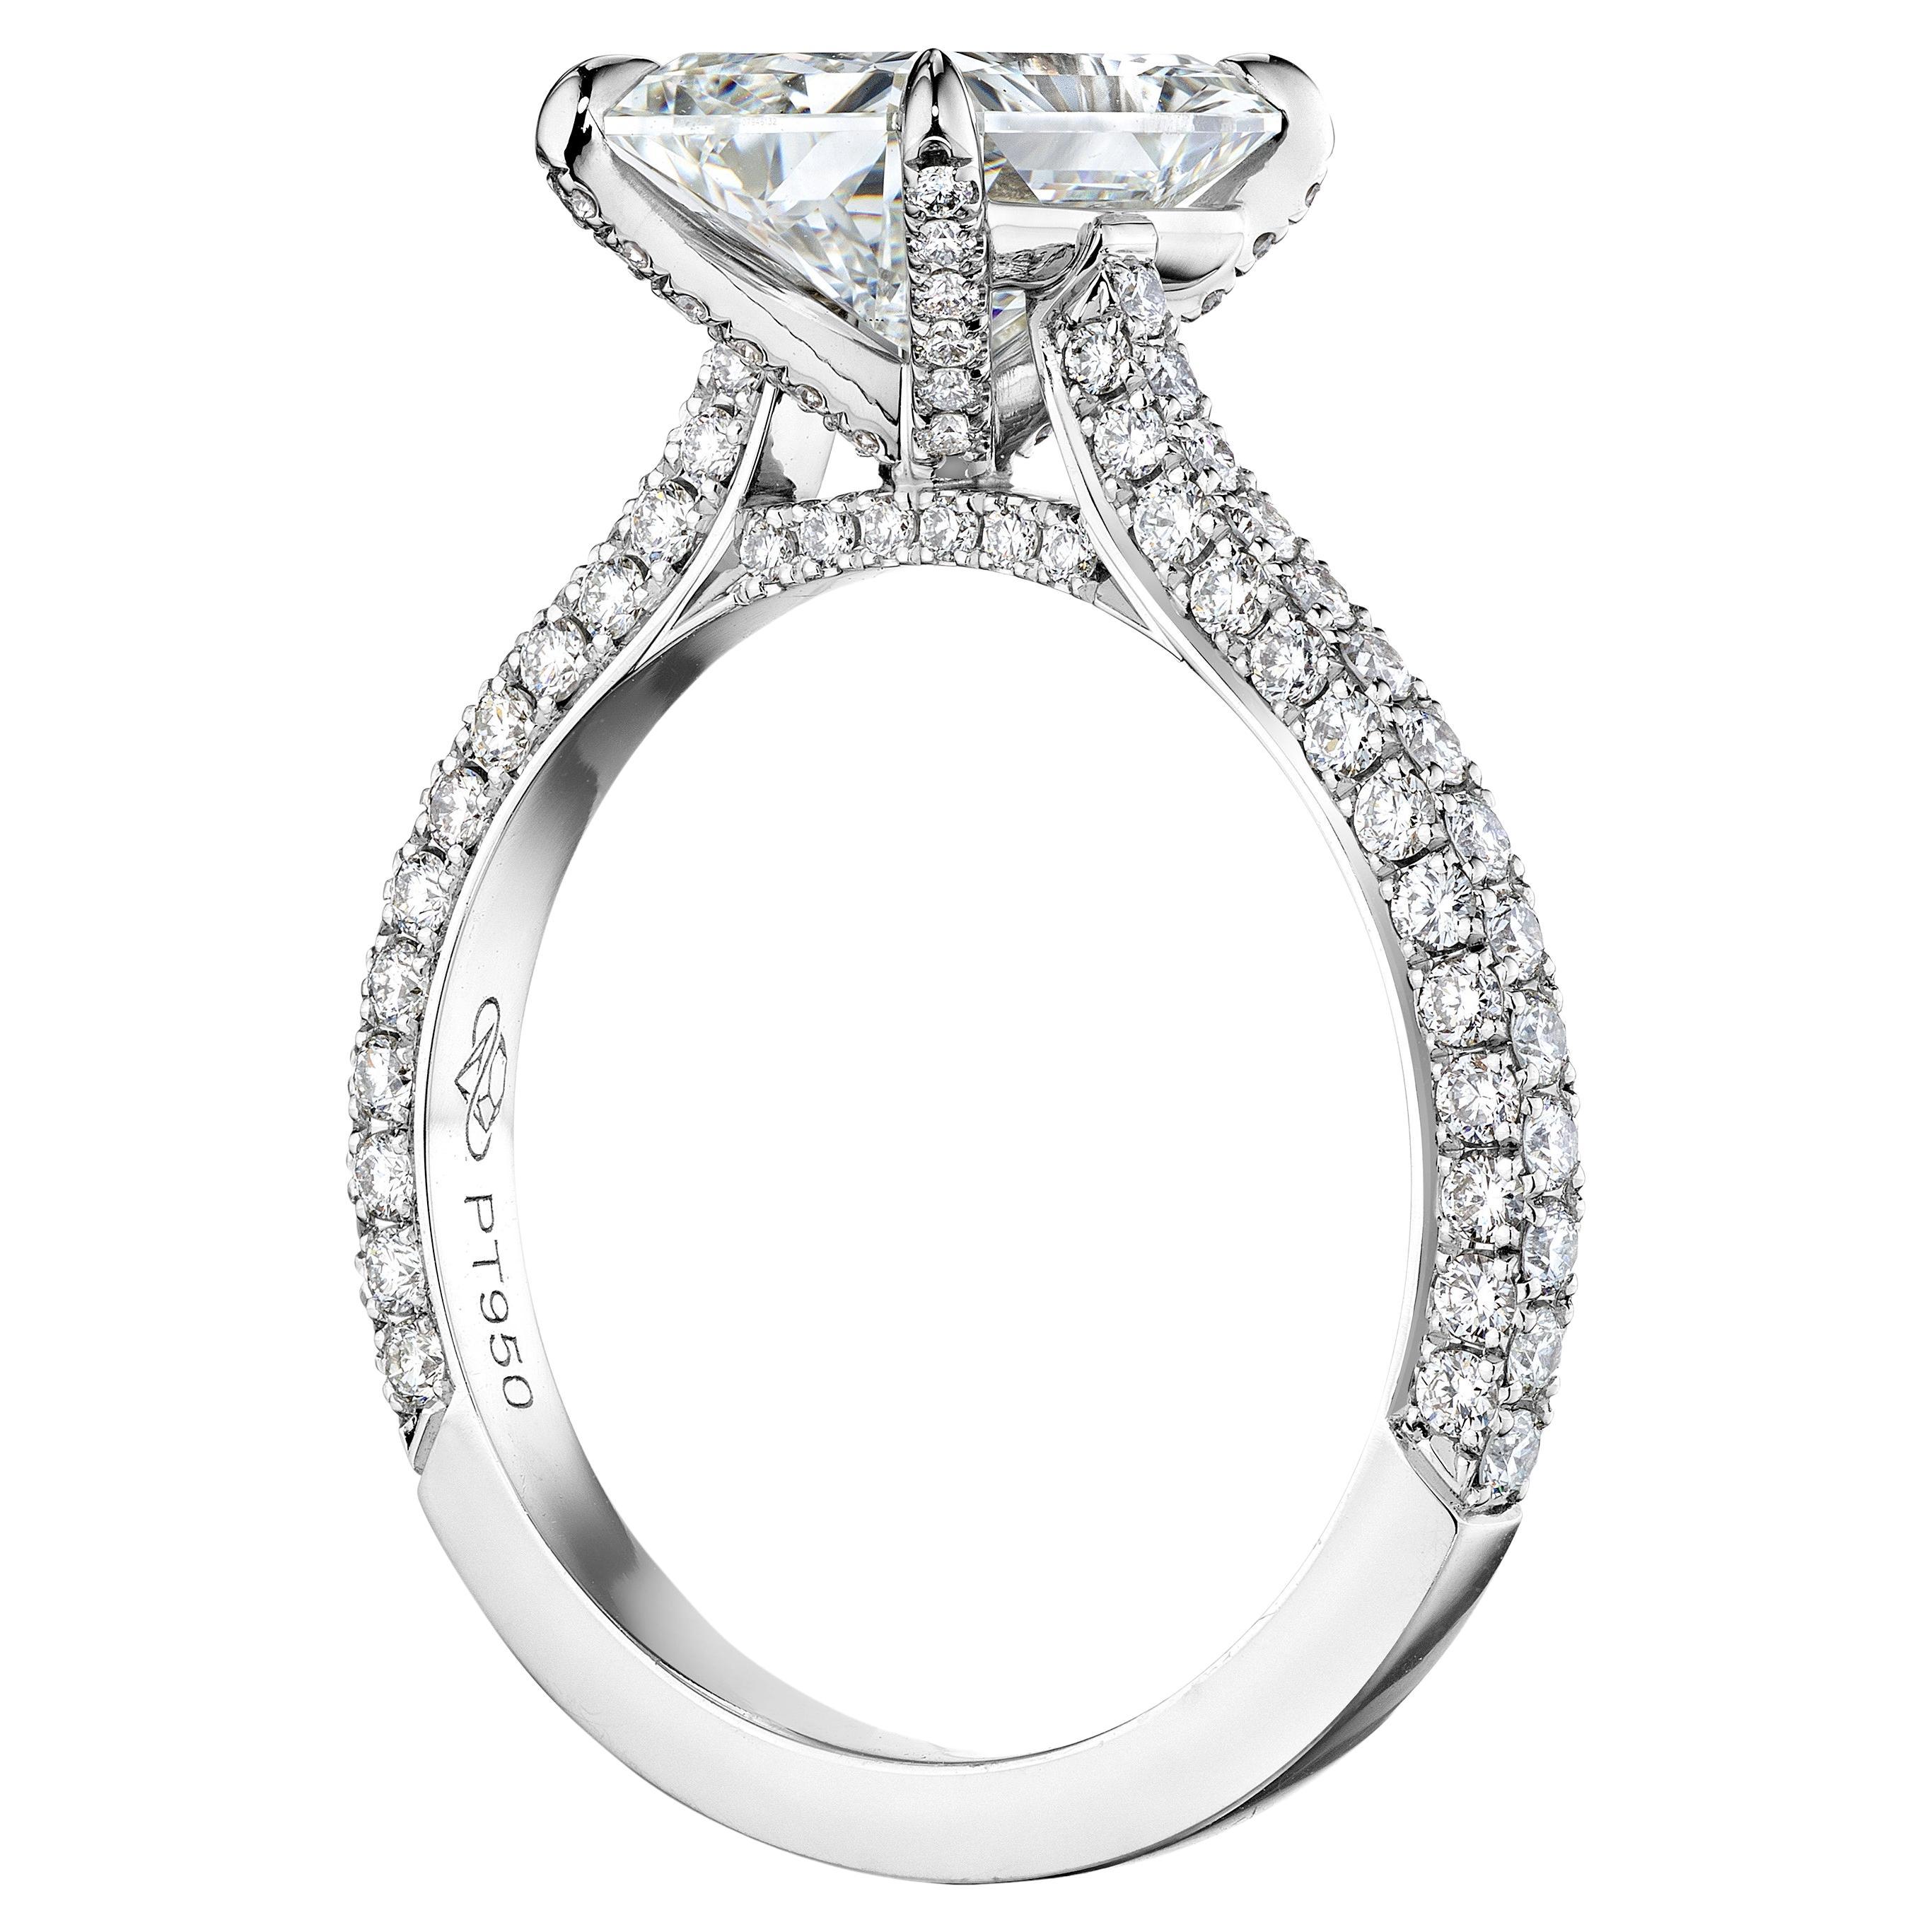 GIA Certified 4.00 Carat F VS2 Radiant Diamond Engagement Ring "Sabrina" For Sale